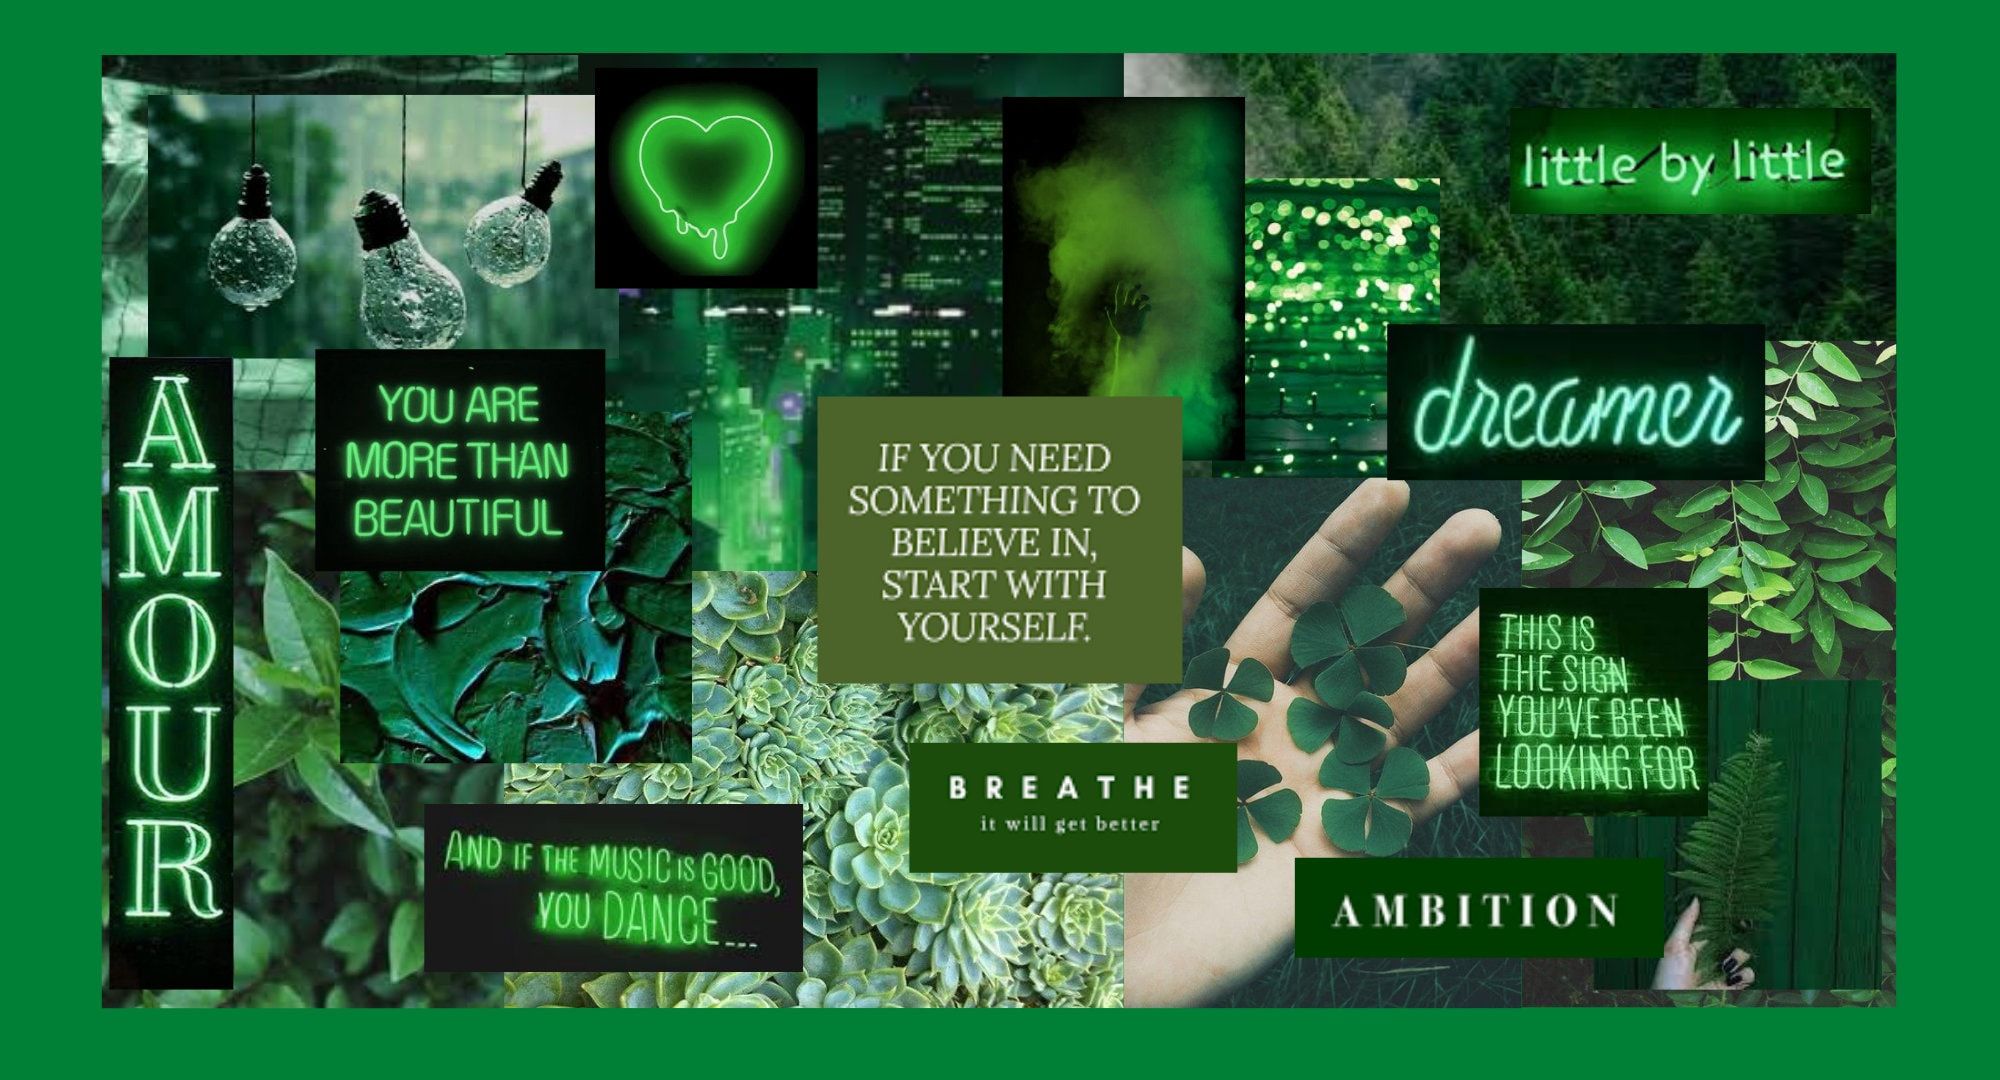 A green collage with various images and text - Laptop, green